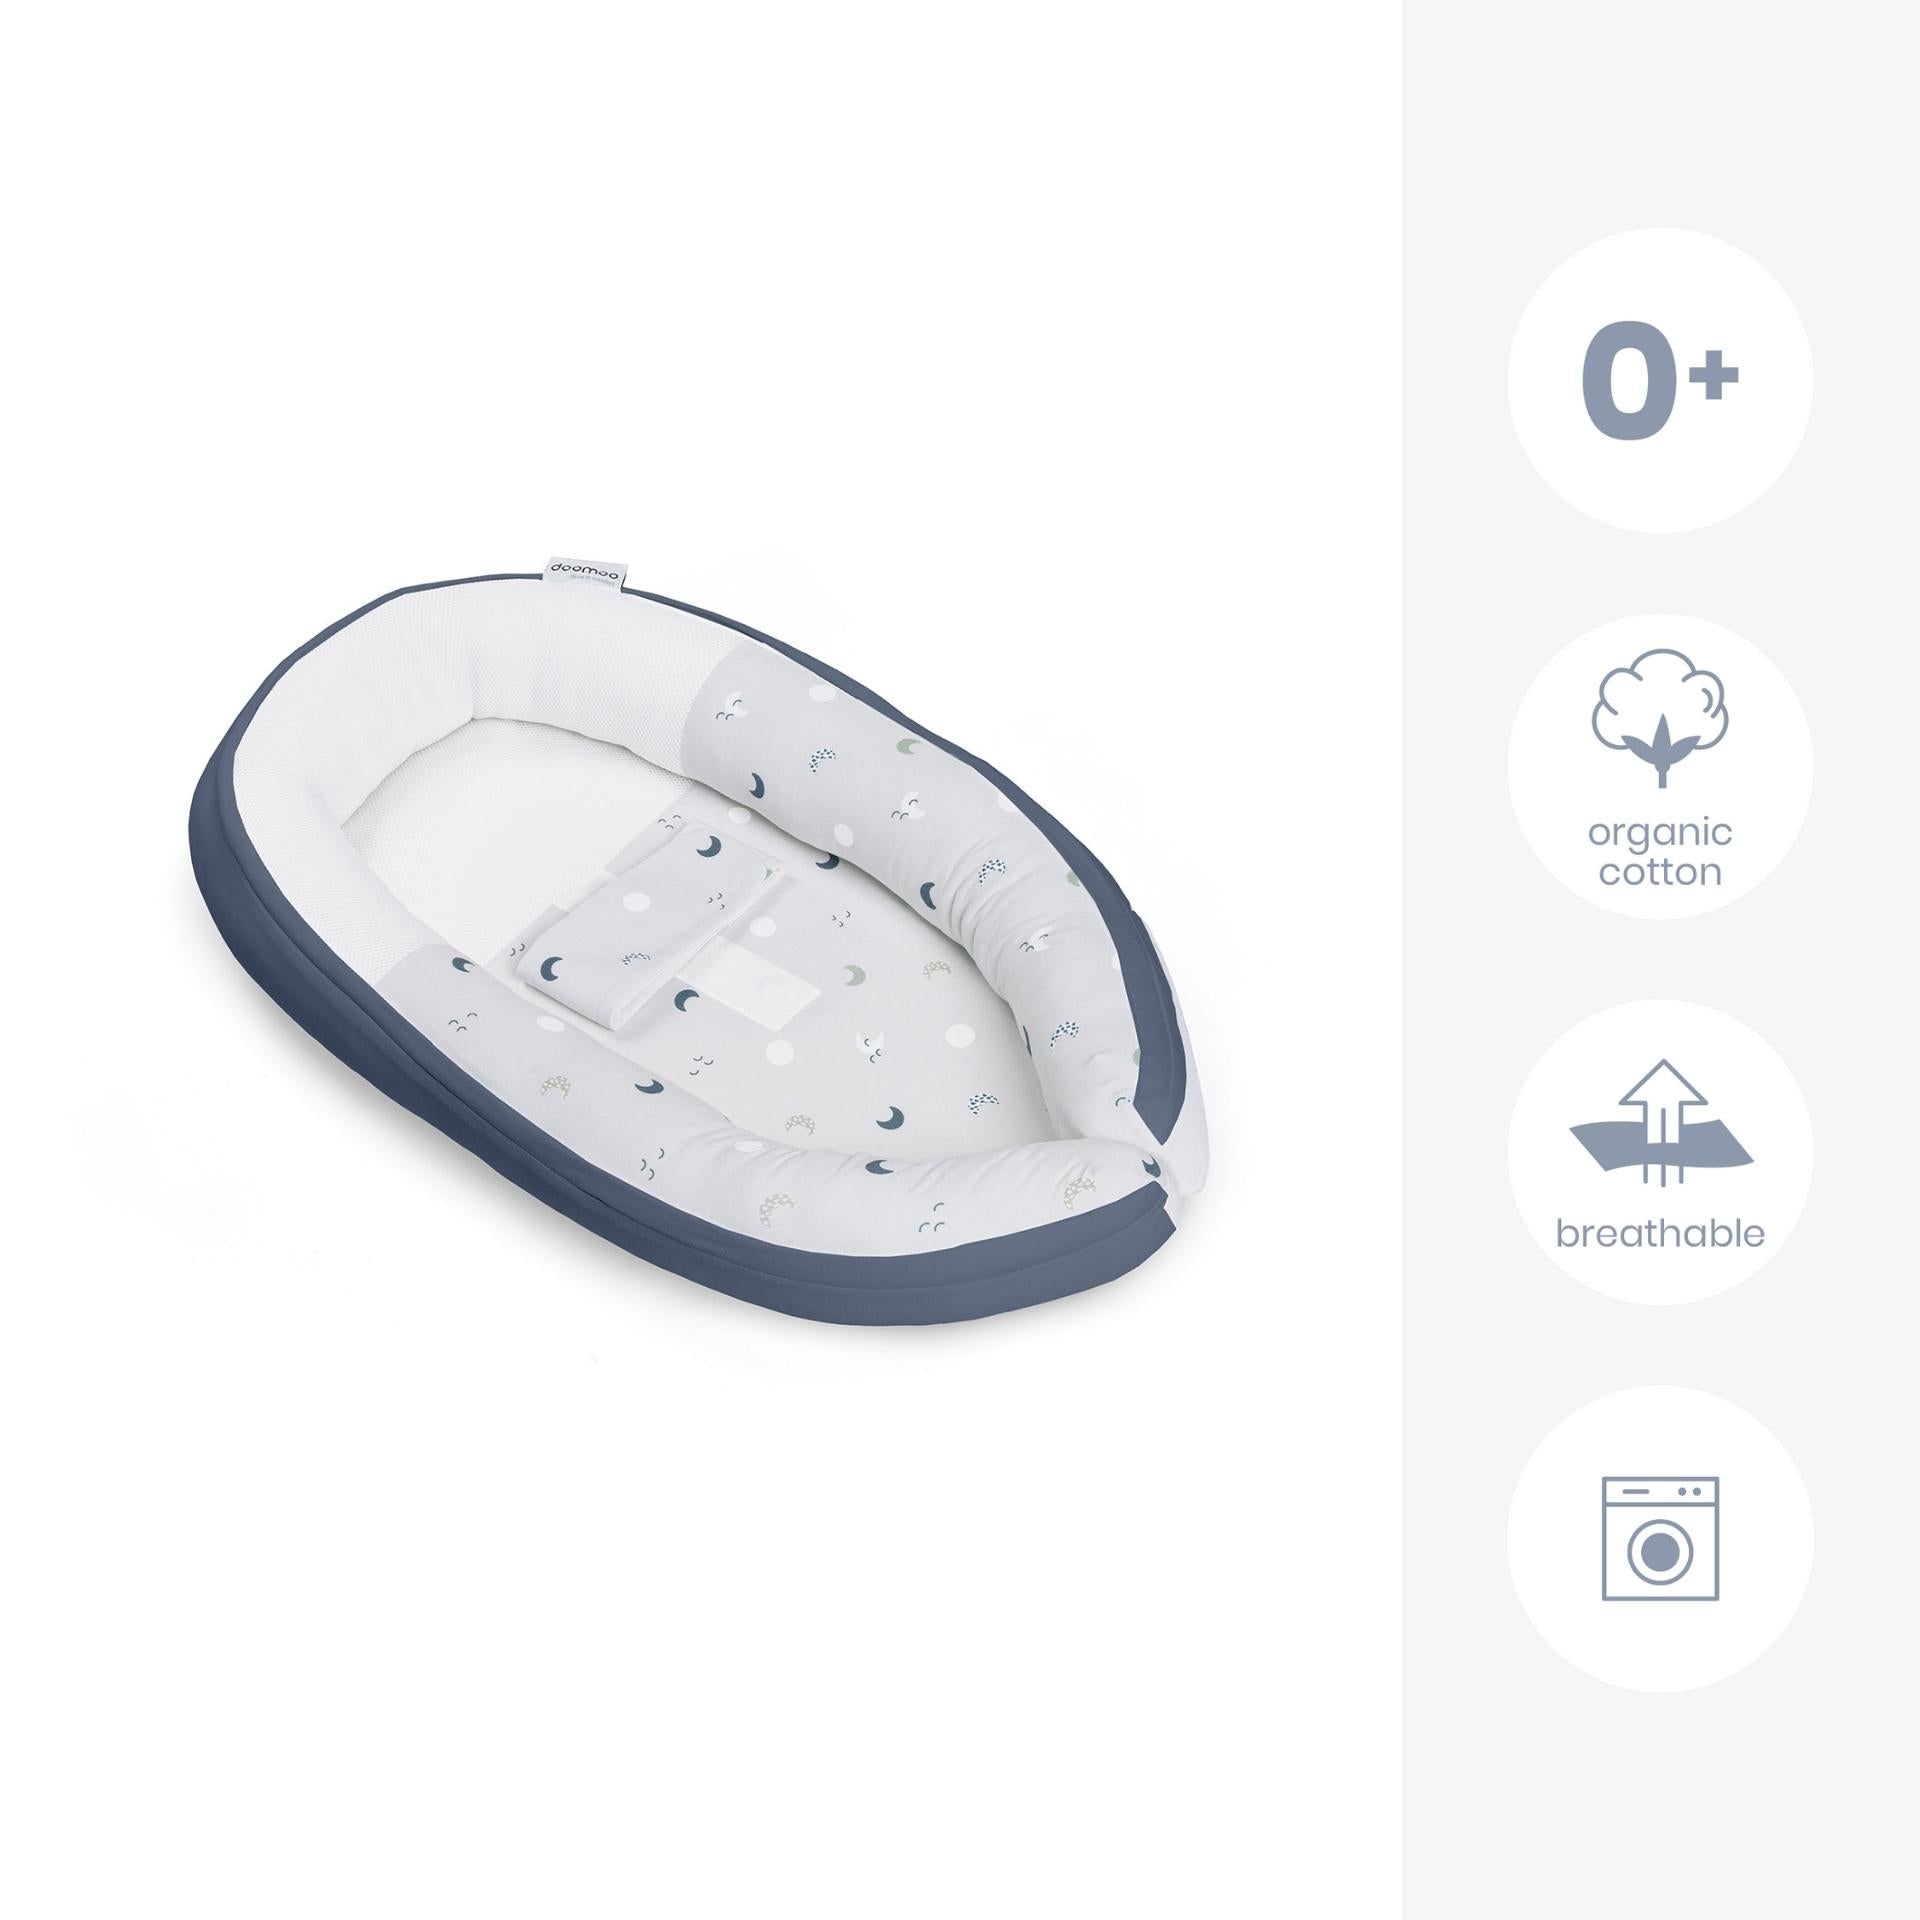 doomoo cocoon - safe and cosy baby nest - reassure the baby